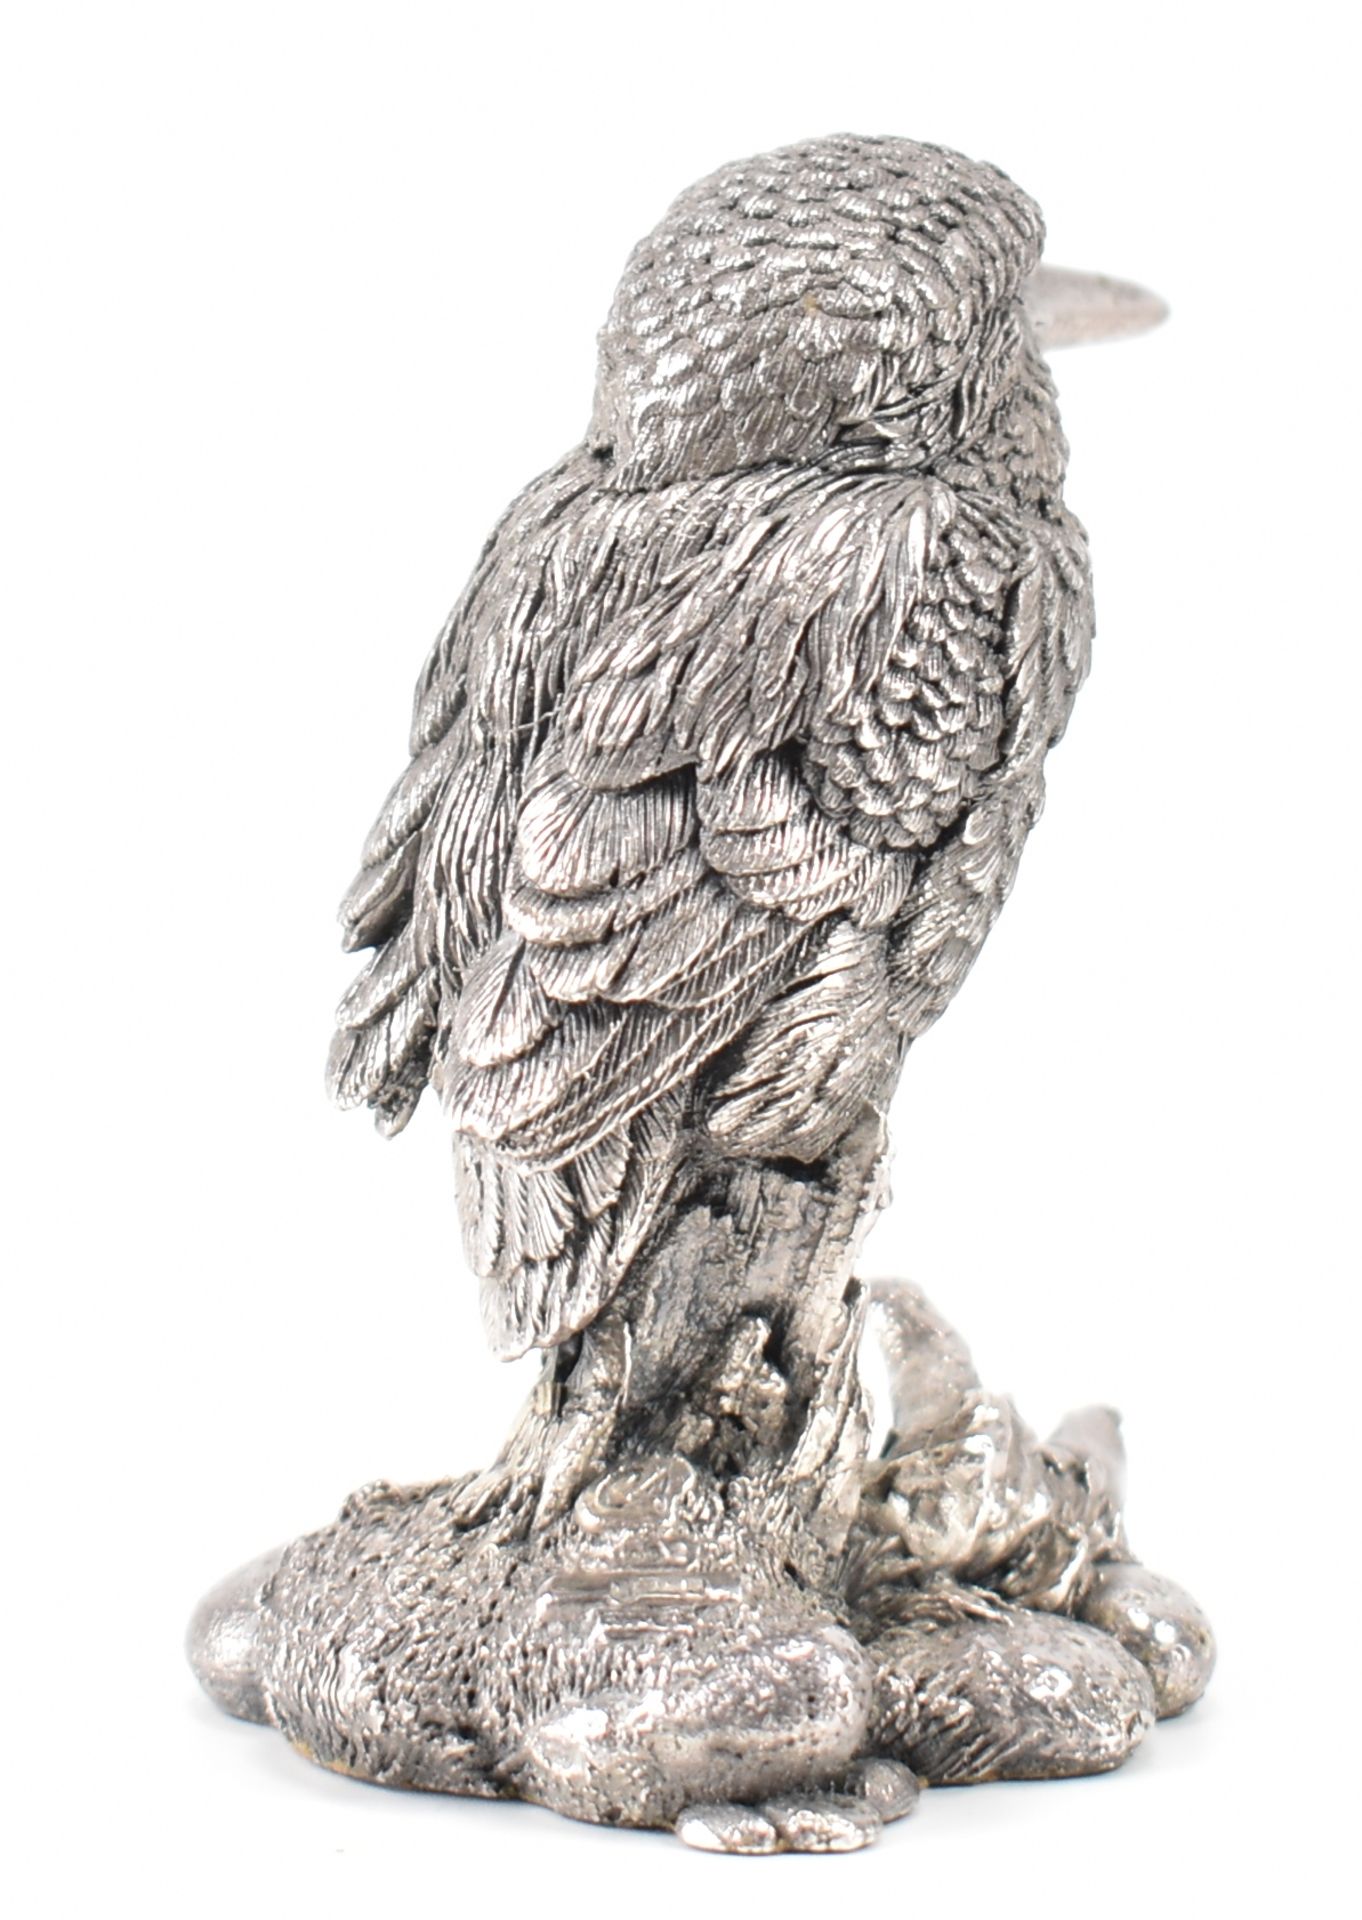 SILVER HALLMARKED COUNTRY ARTISTS KINGFISHER FIGURINE - Image 2 of 4